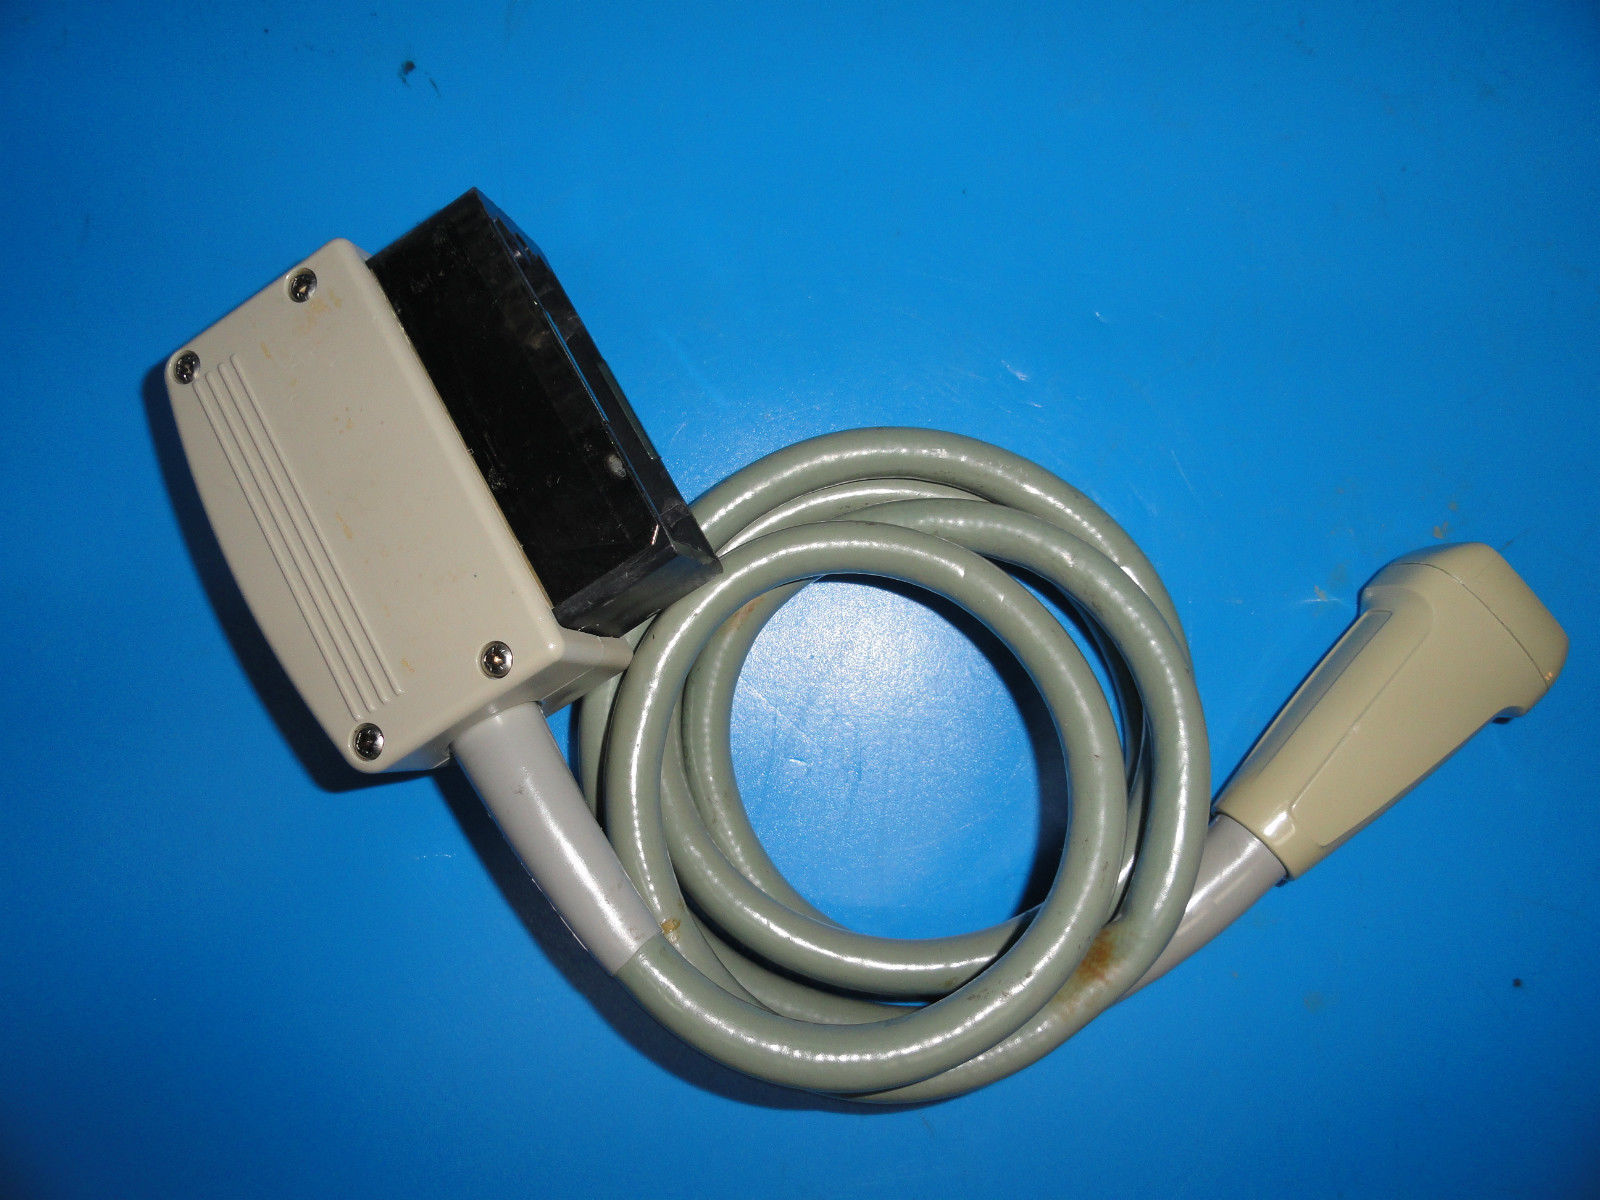 a gray probe heaf connected to an electrical device